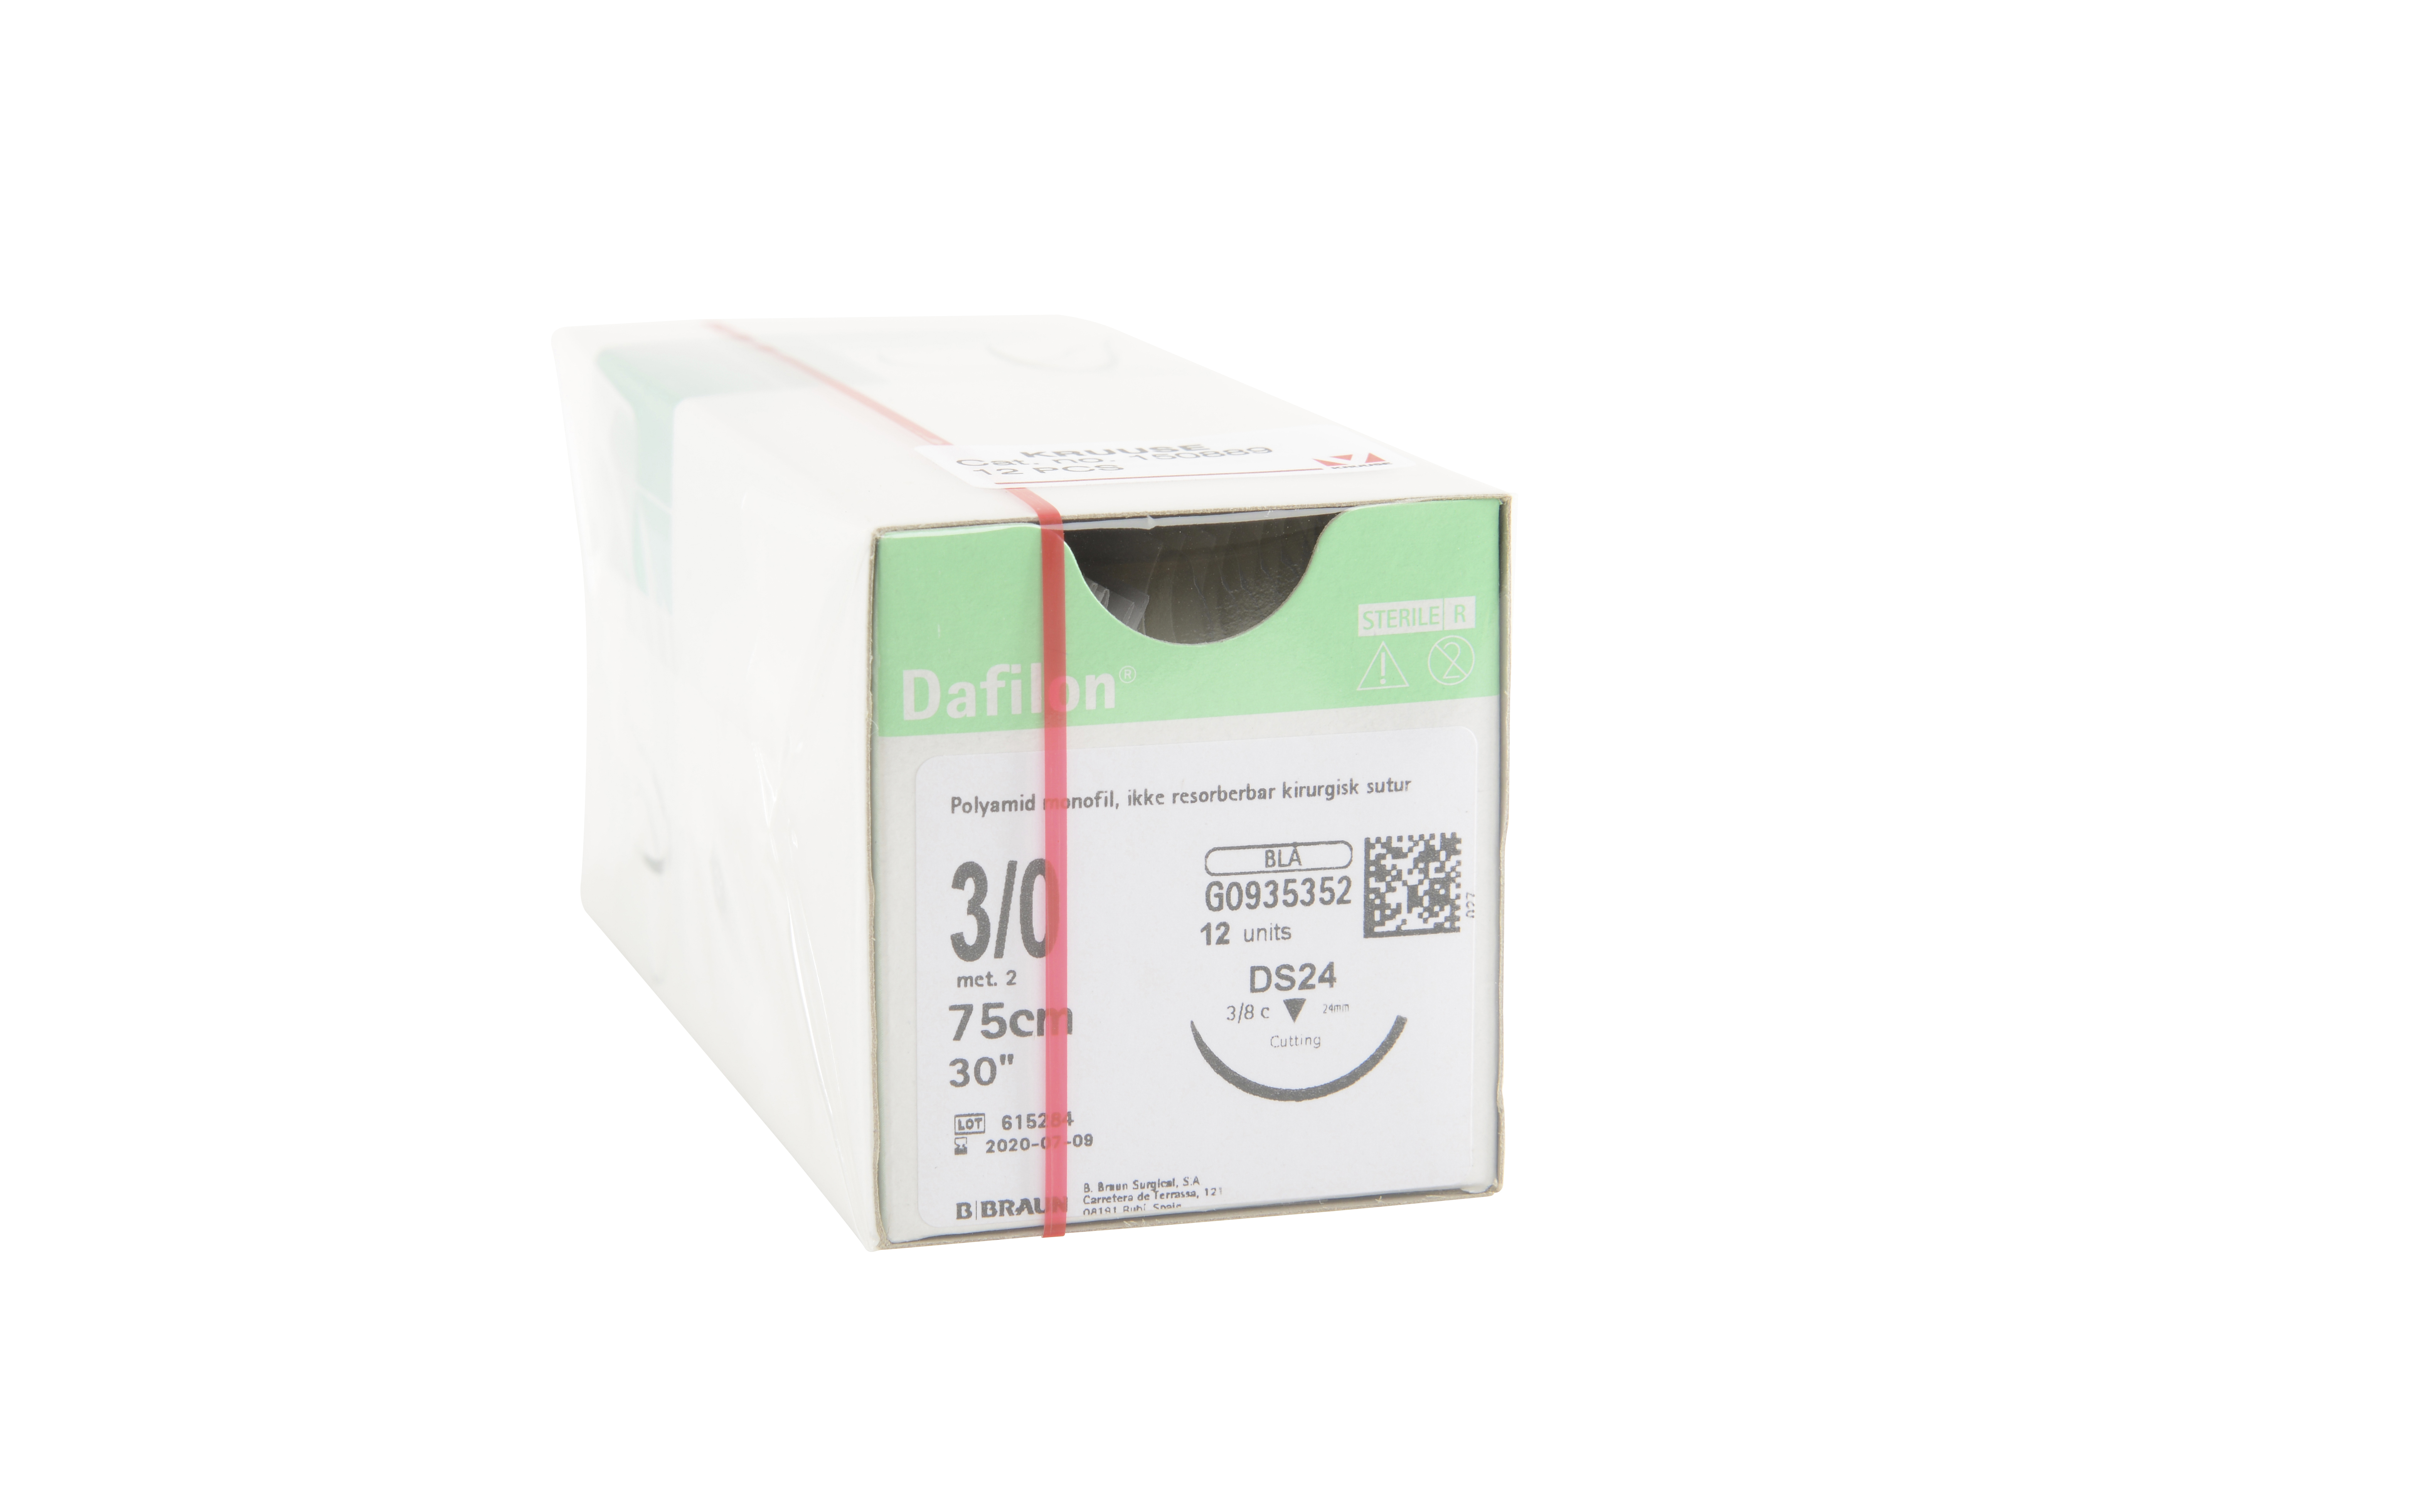 Miralene USP 3/0, DS-24, only sold as 12/pk